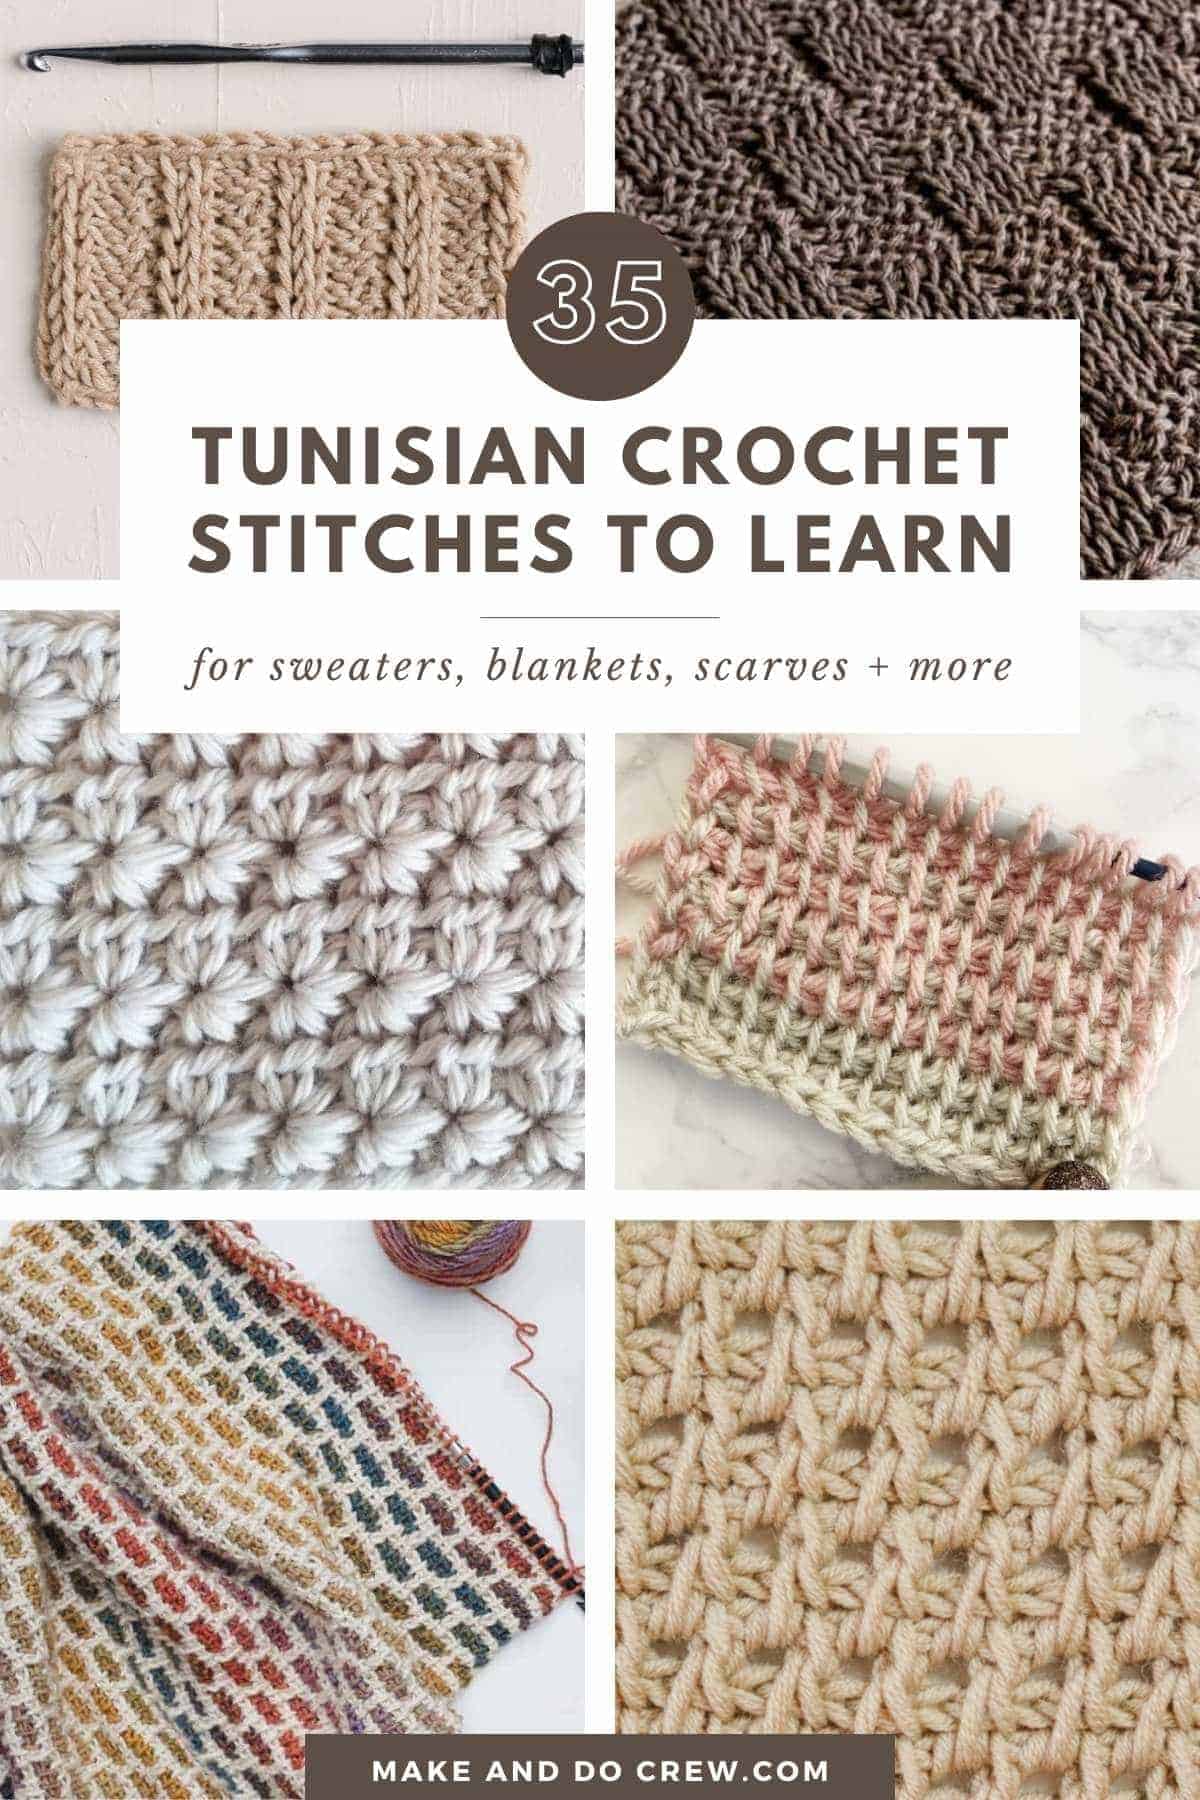 Collection of Tunisian crochet stitches to learn for making sweaters, blankets, scarves, etc.